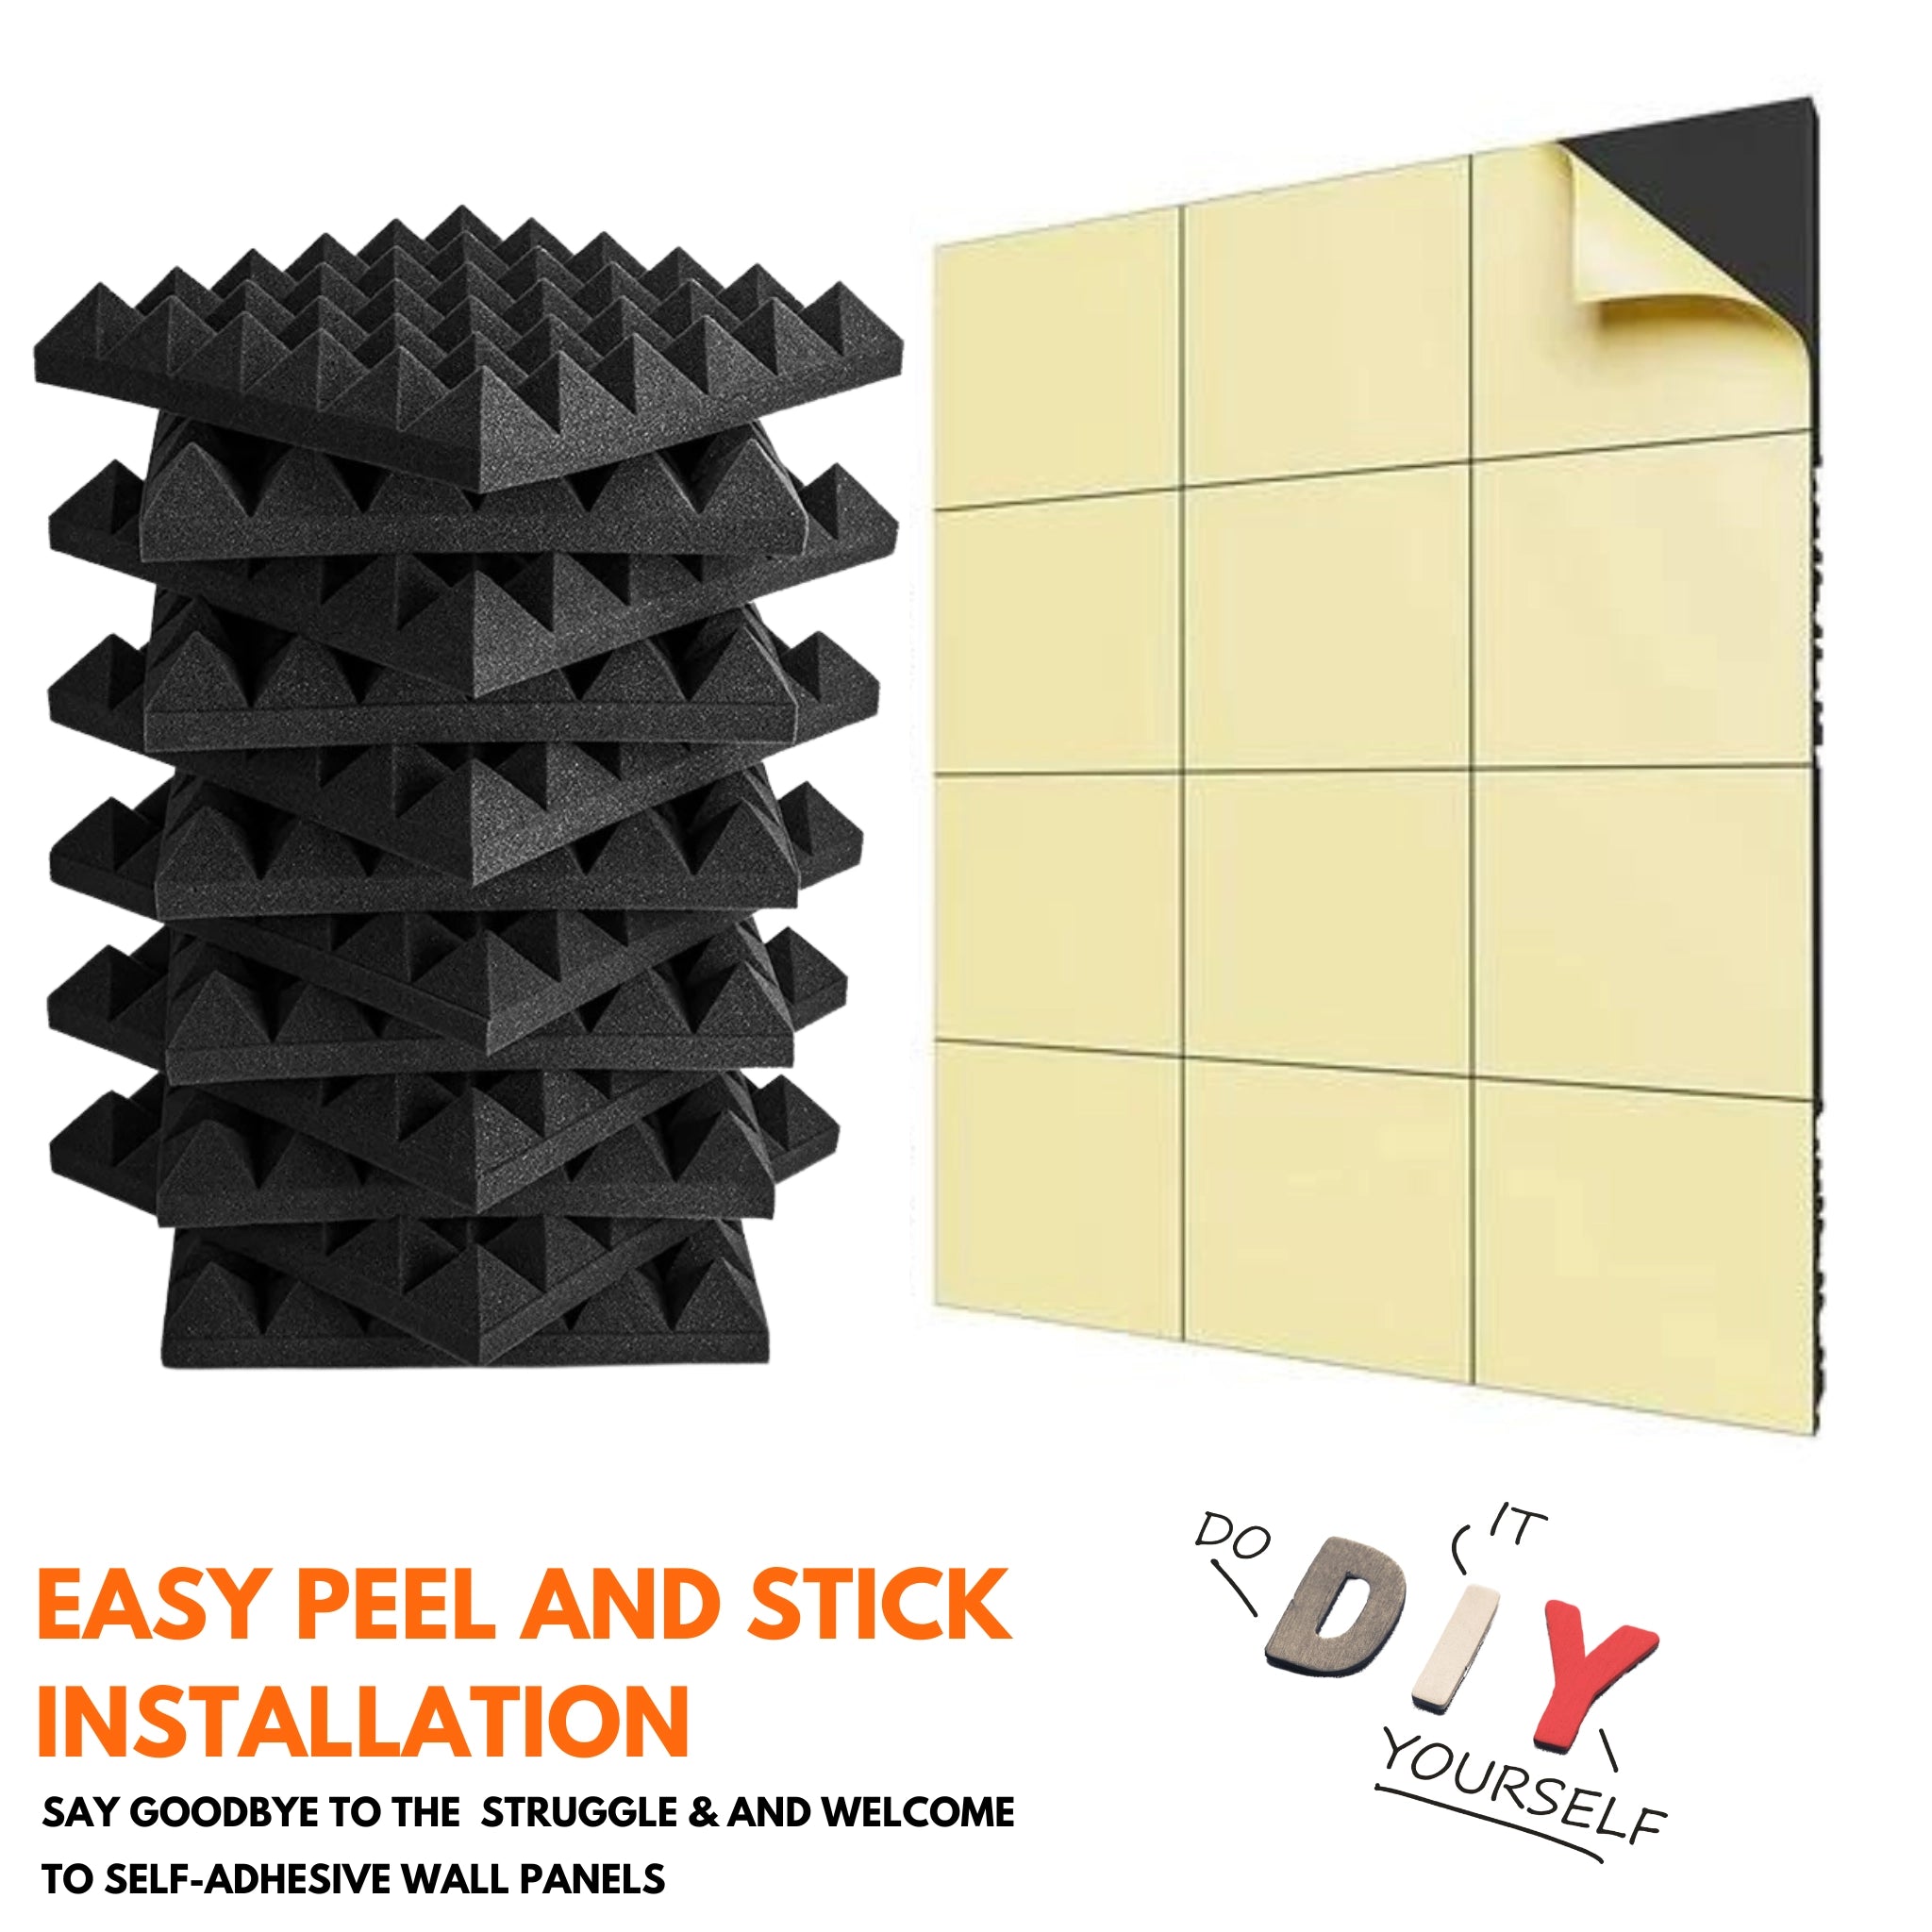 Easy peel-and-stick installation for self-adhesive wall panels